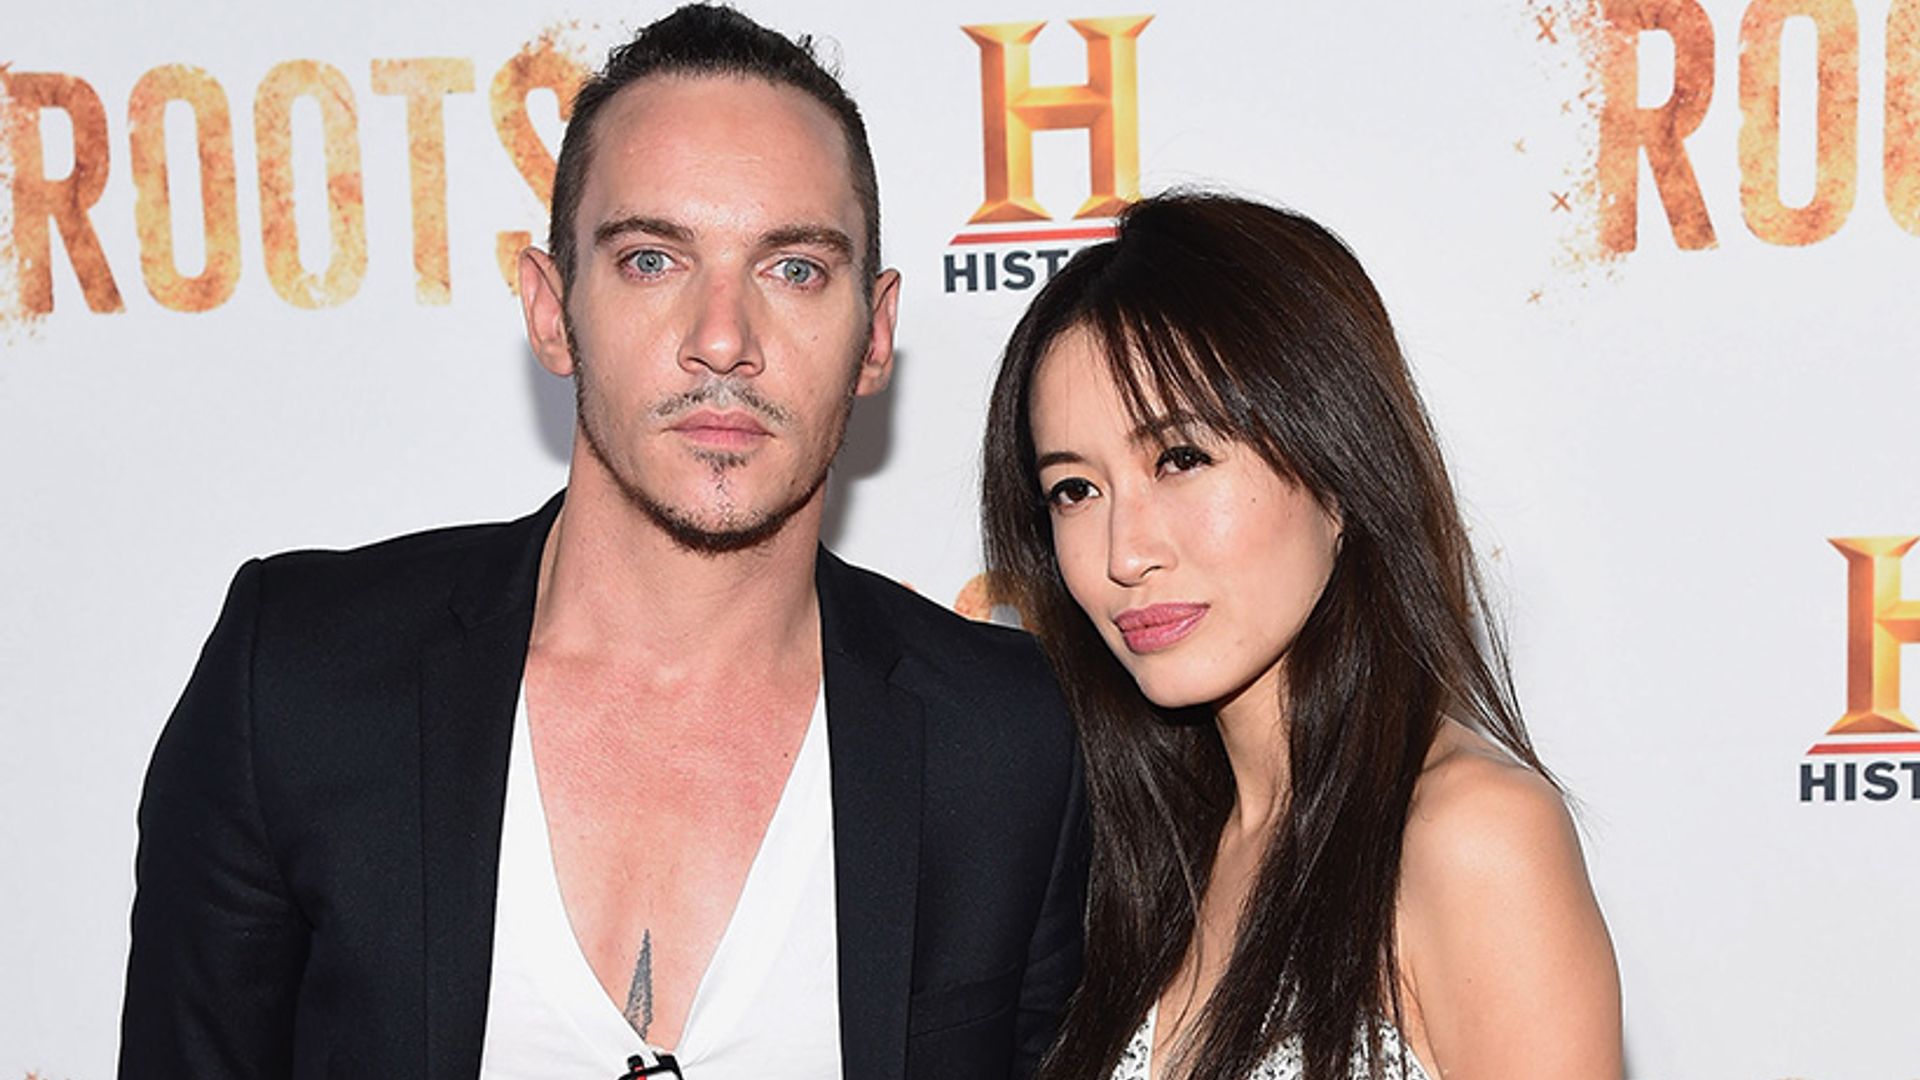 Jonathan Rhys Meyers turns to alcohol after wife suffers miscarriage